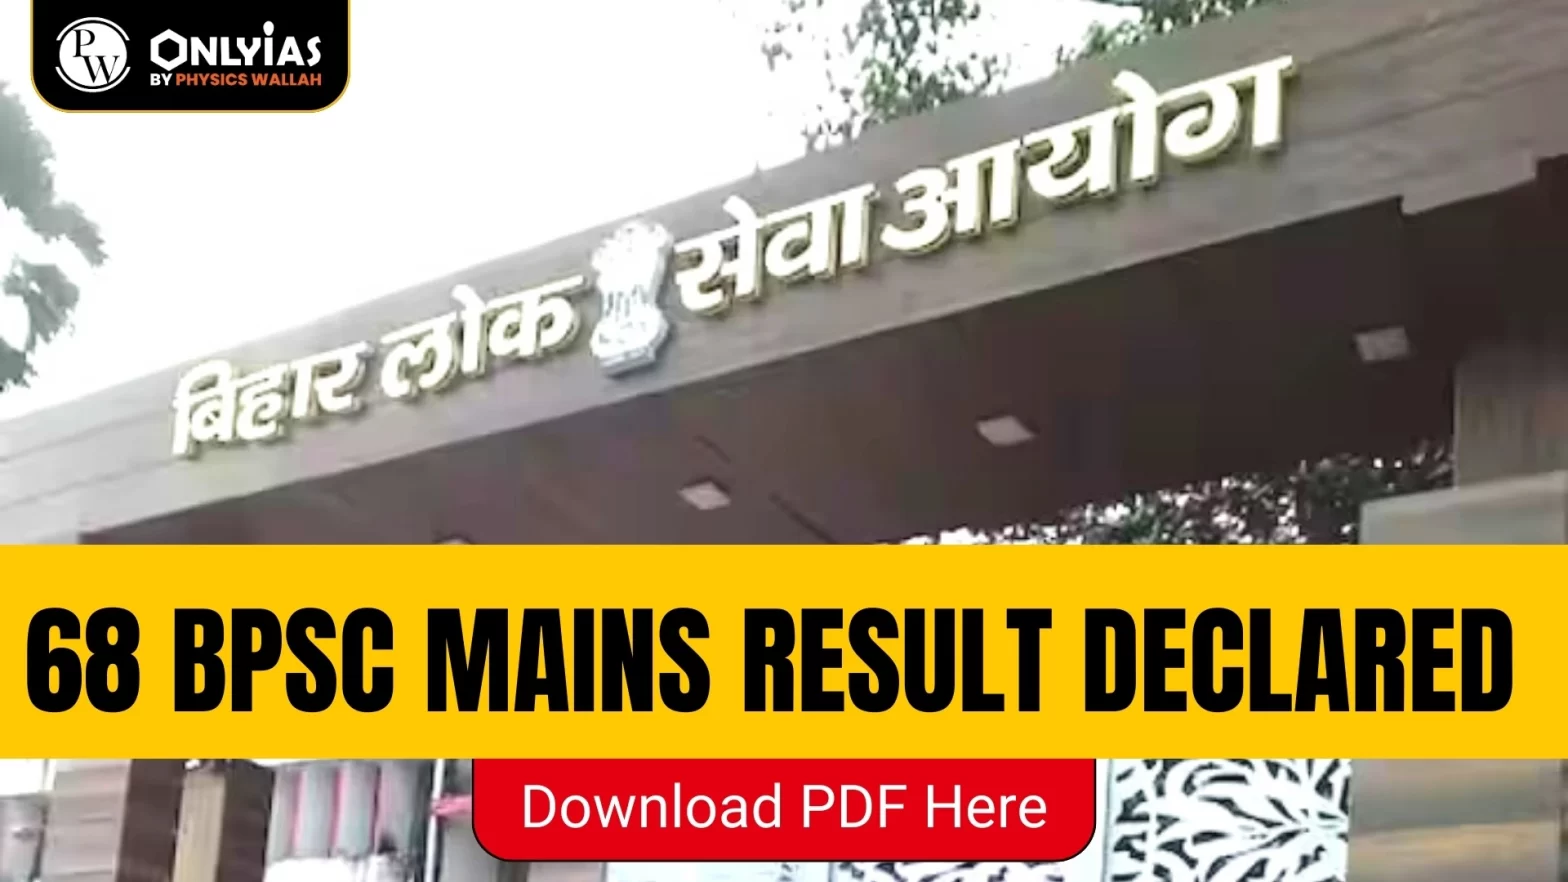 BPSC 68th Mains Result Declared, Download PDF Here